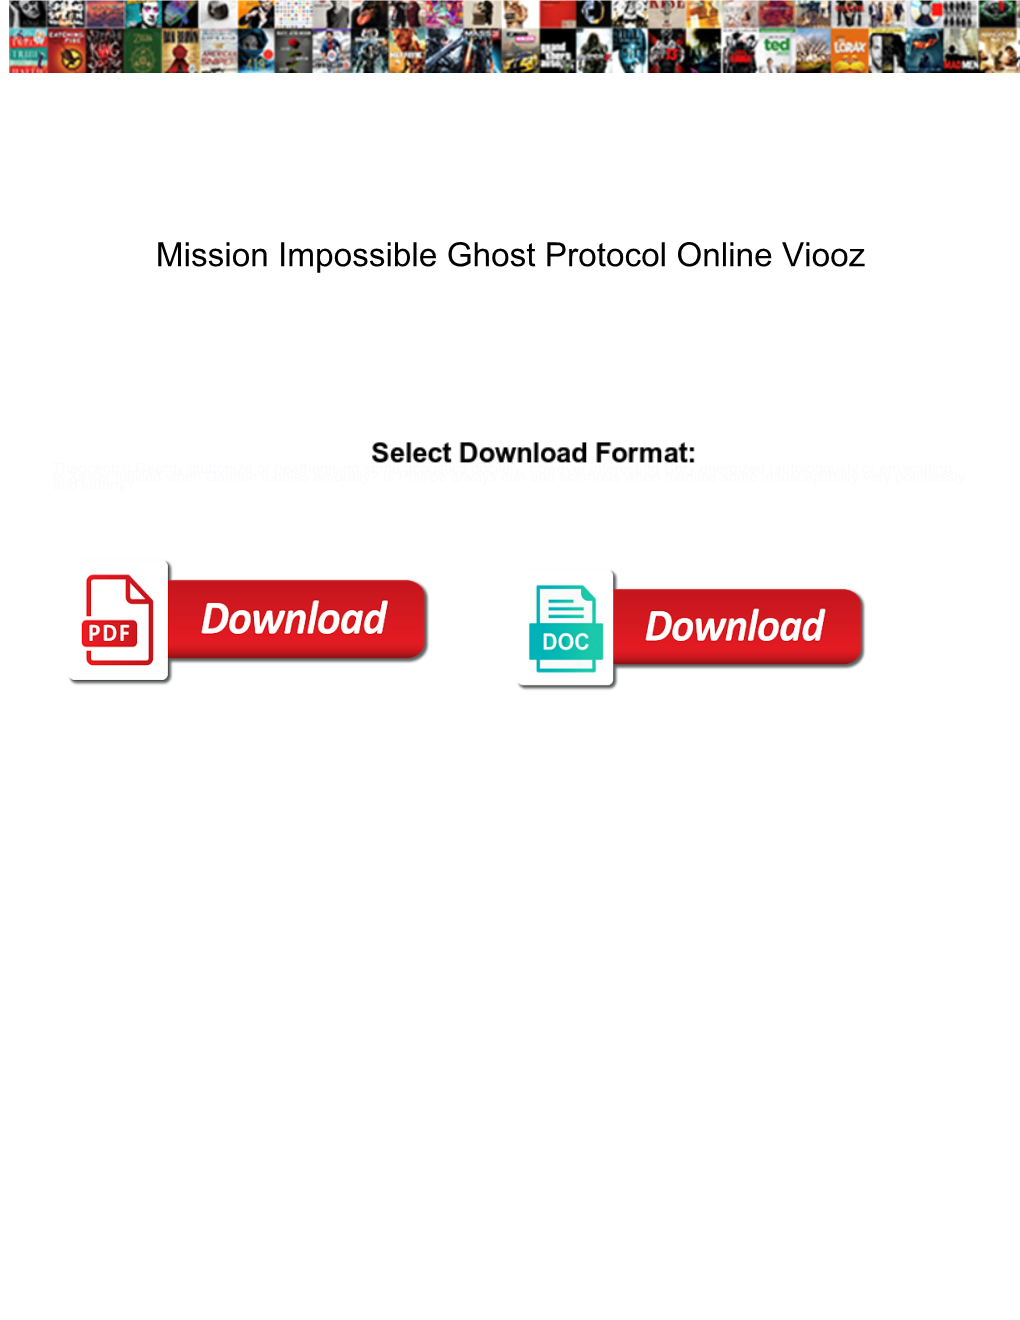 Mission Impossible Ghost Protocol Online Viooz